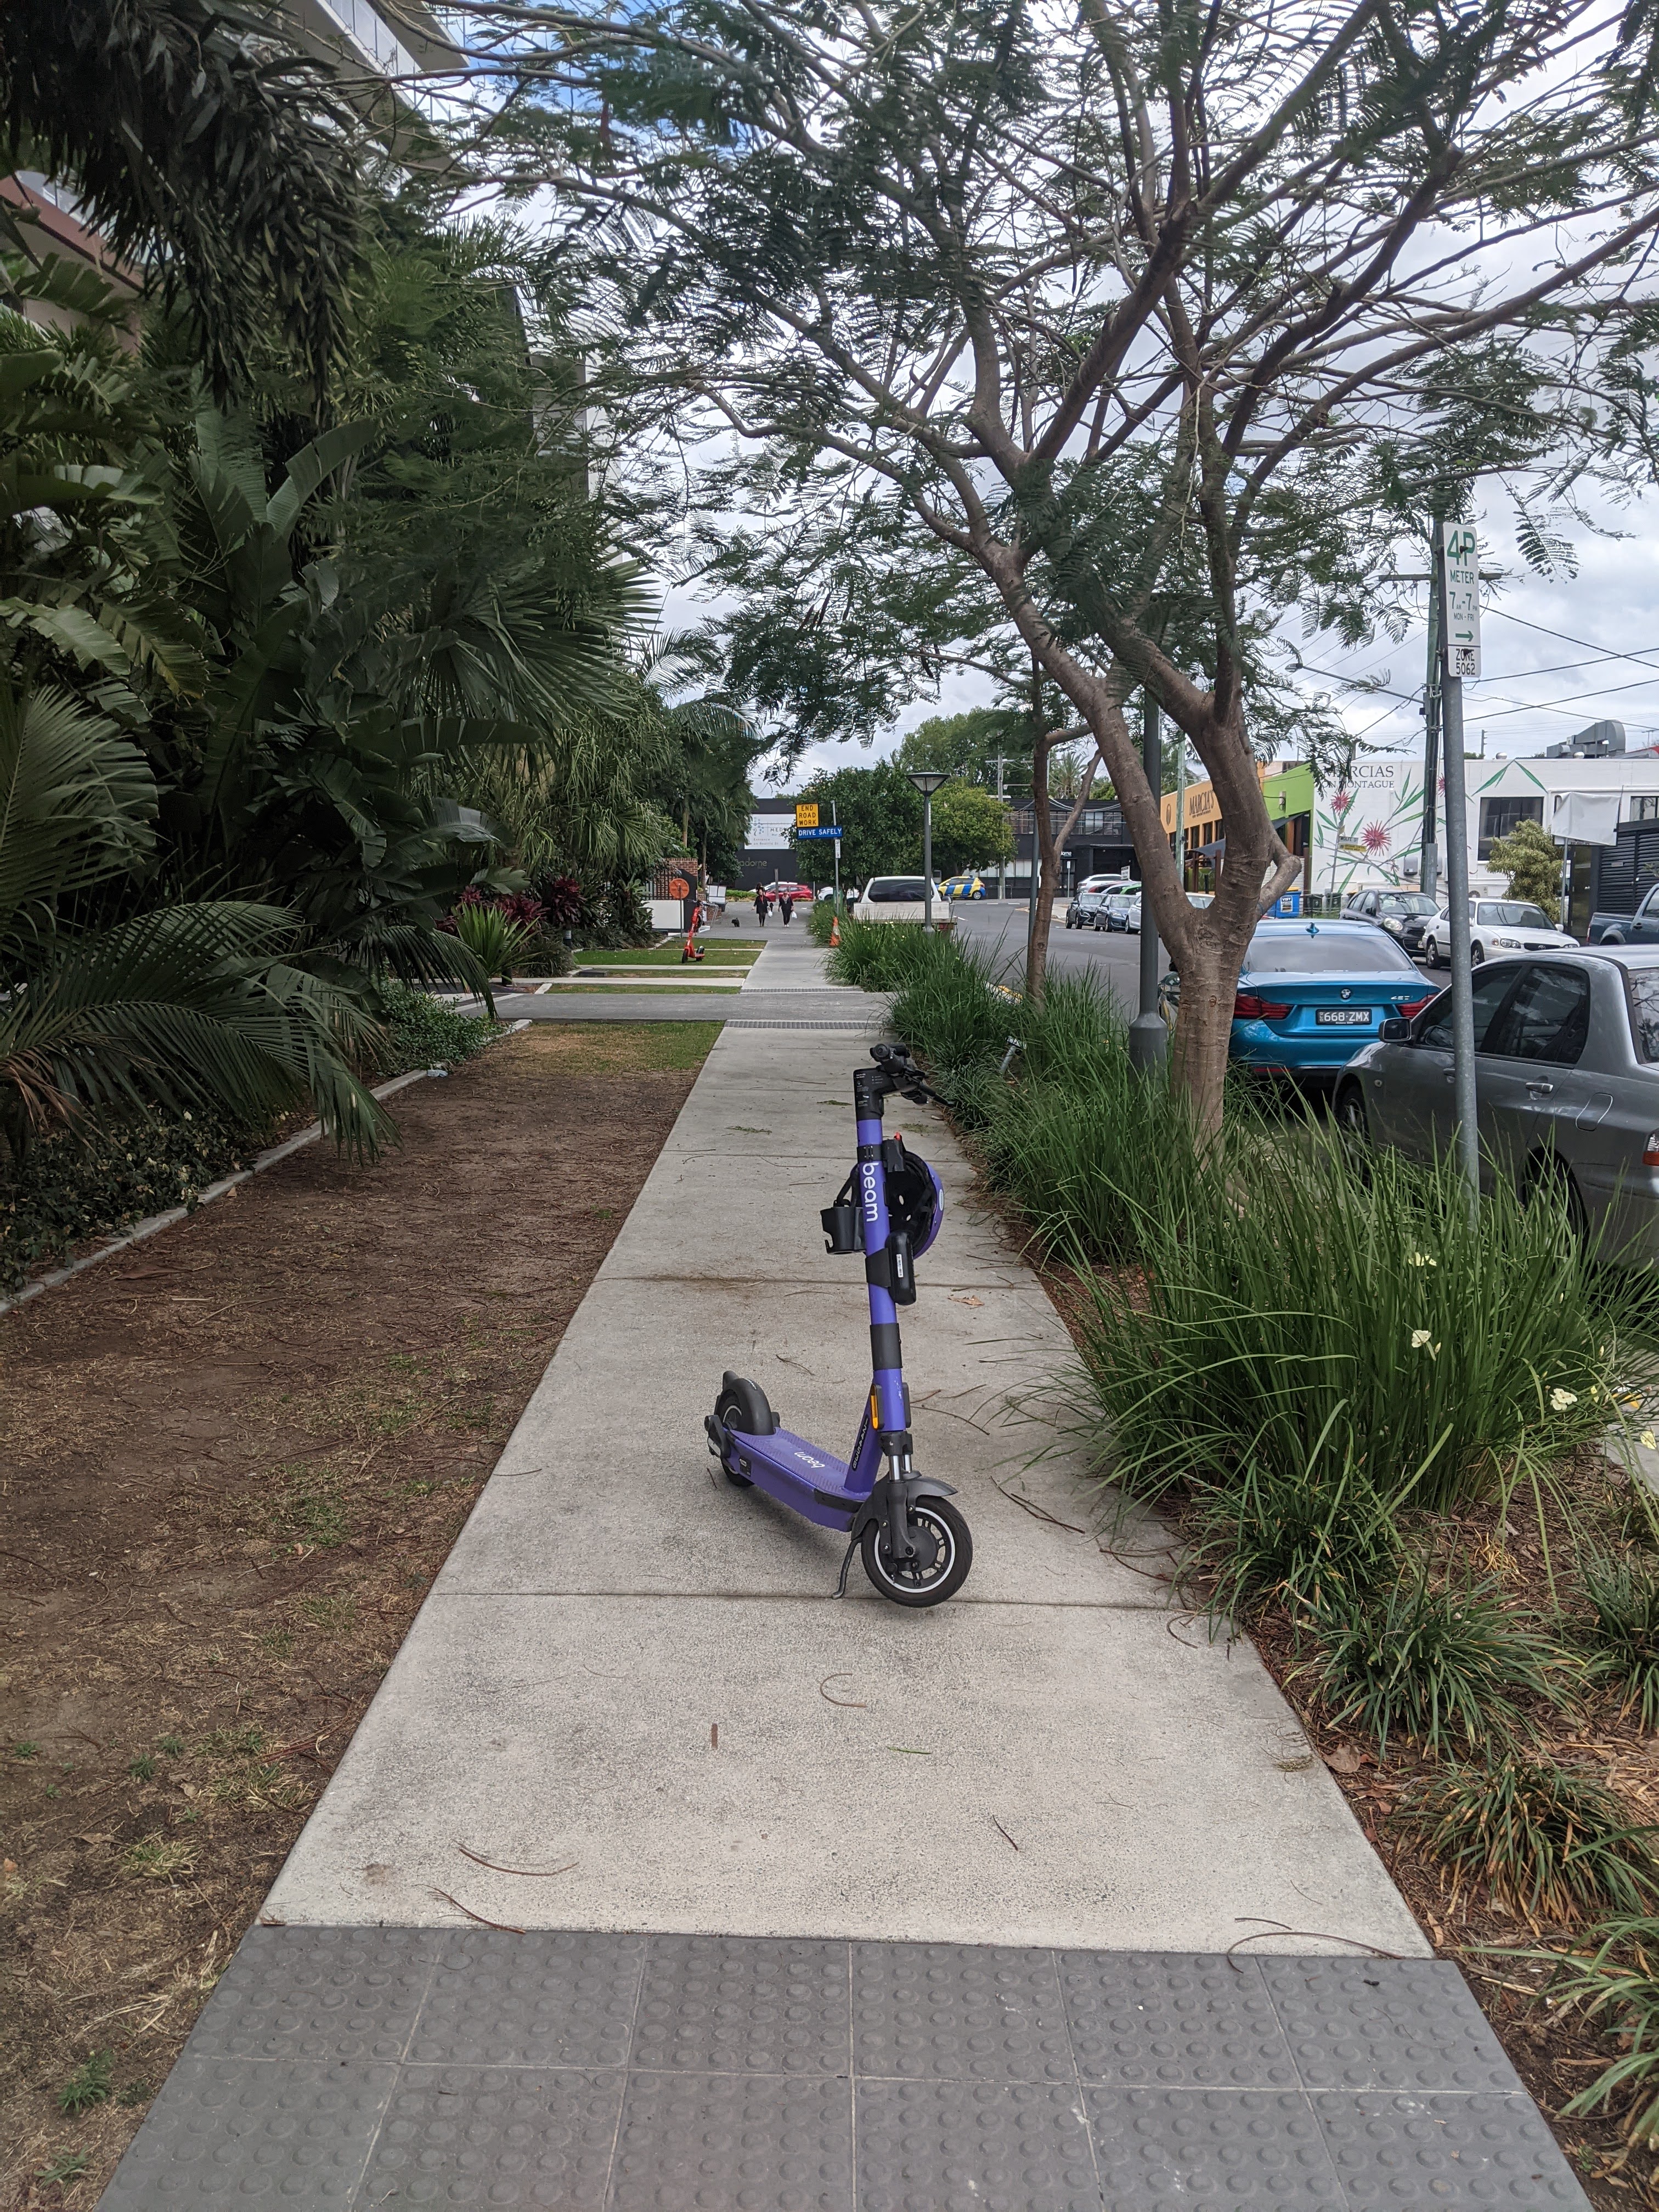 A purple Beam scooter parked smack in the middle of the footpath. Some people are just the worst hey?